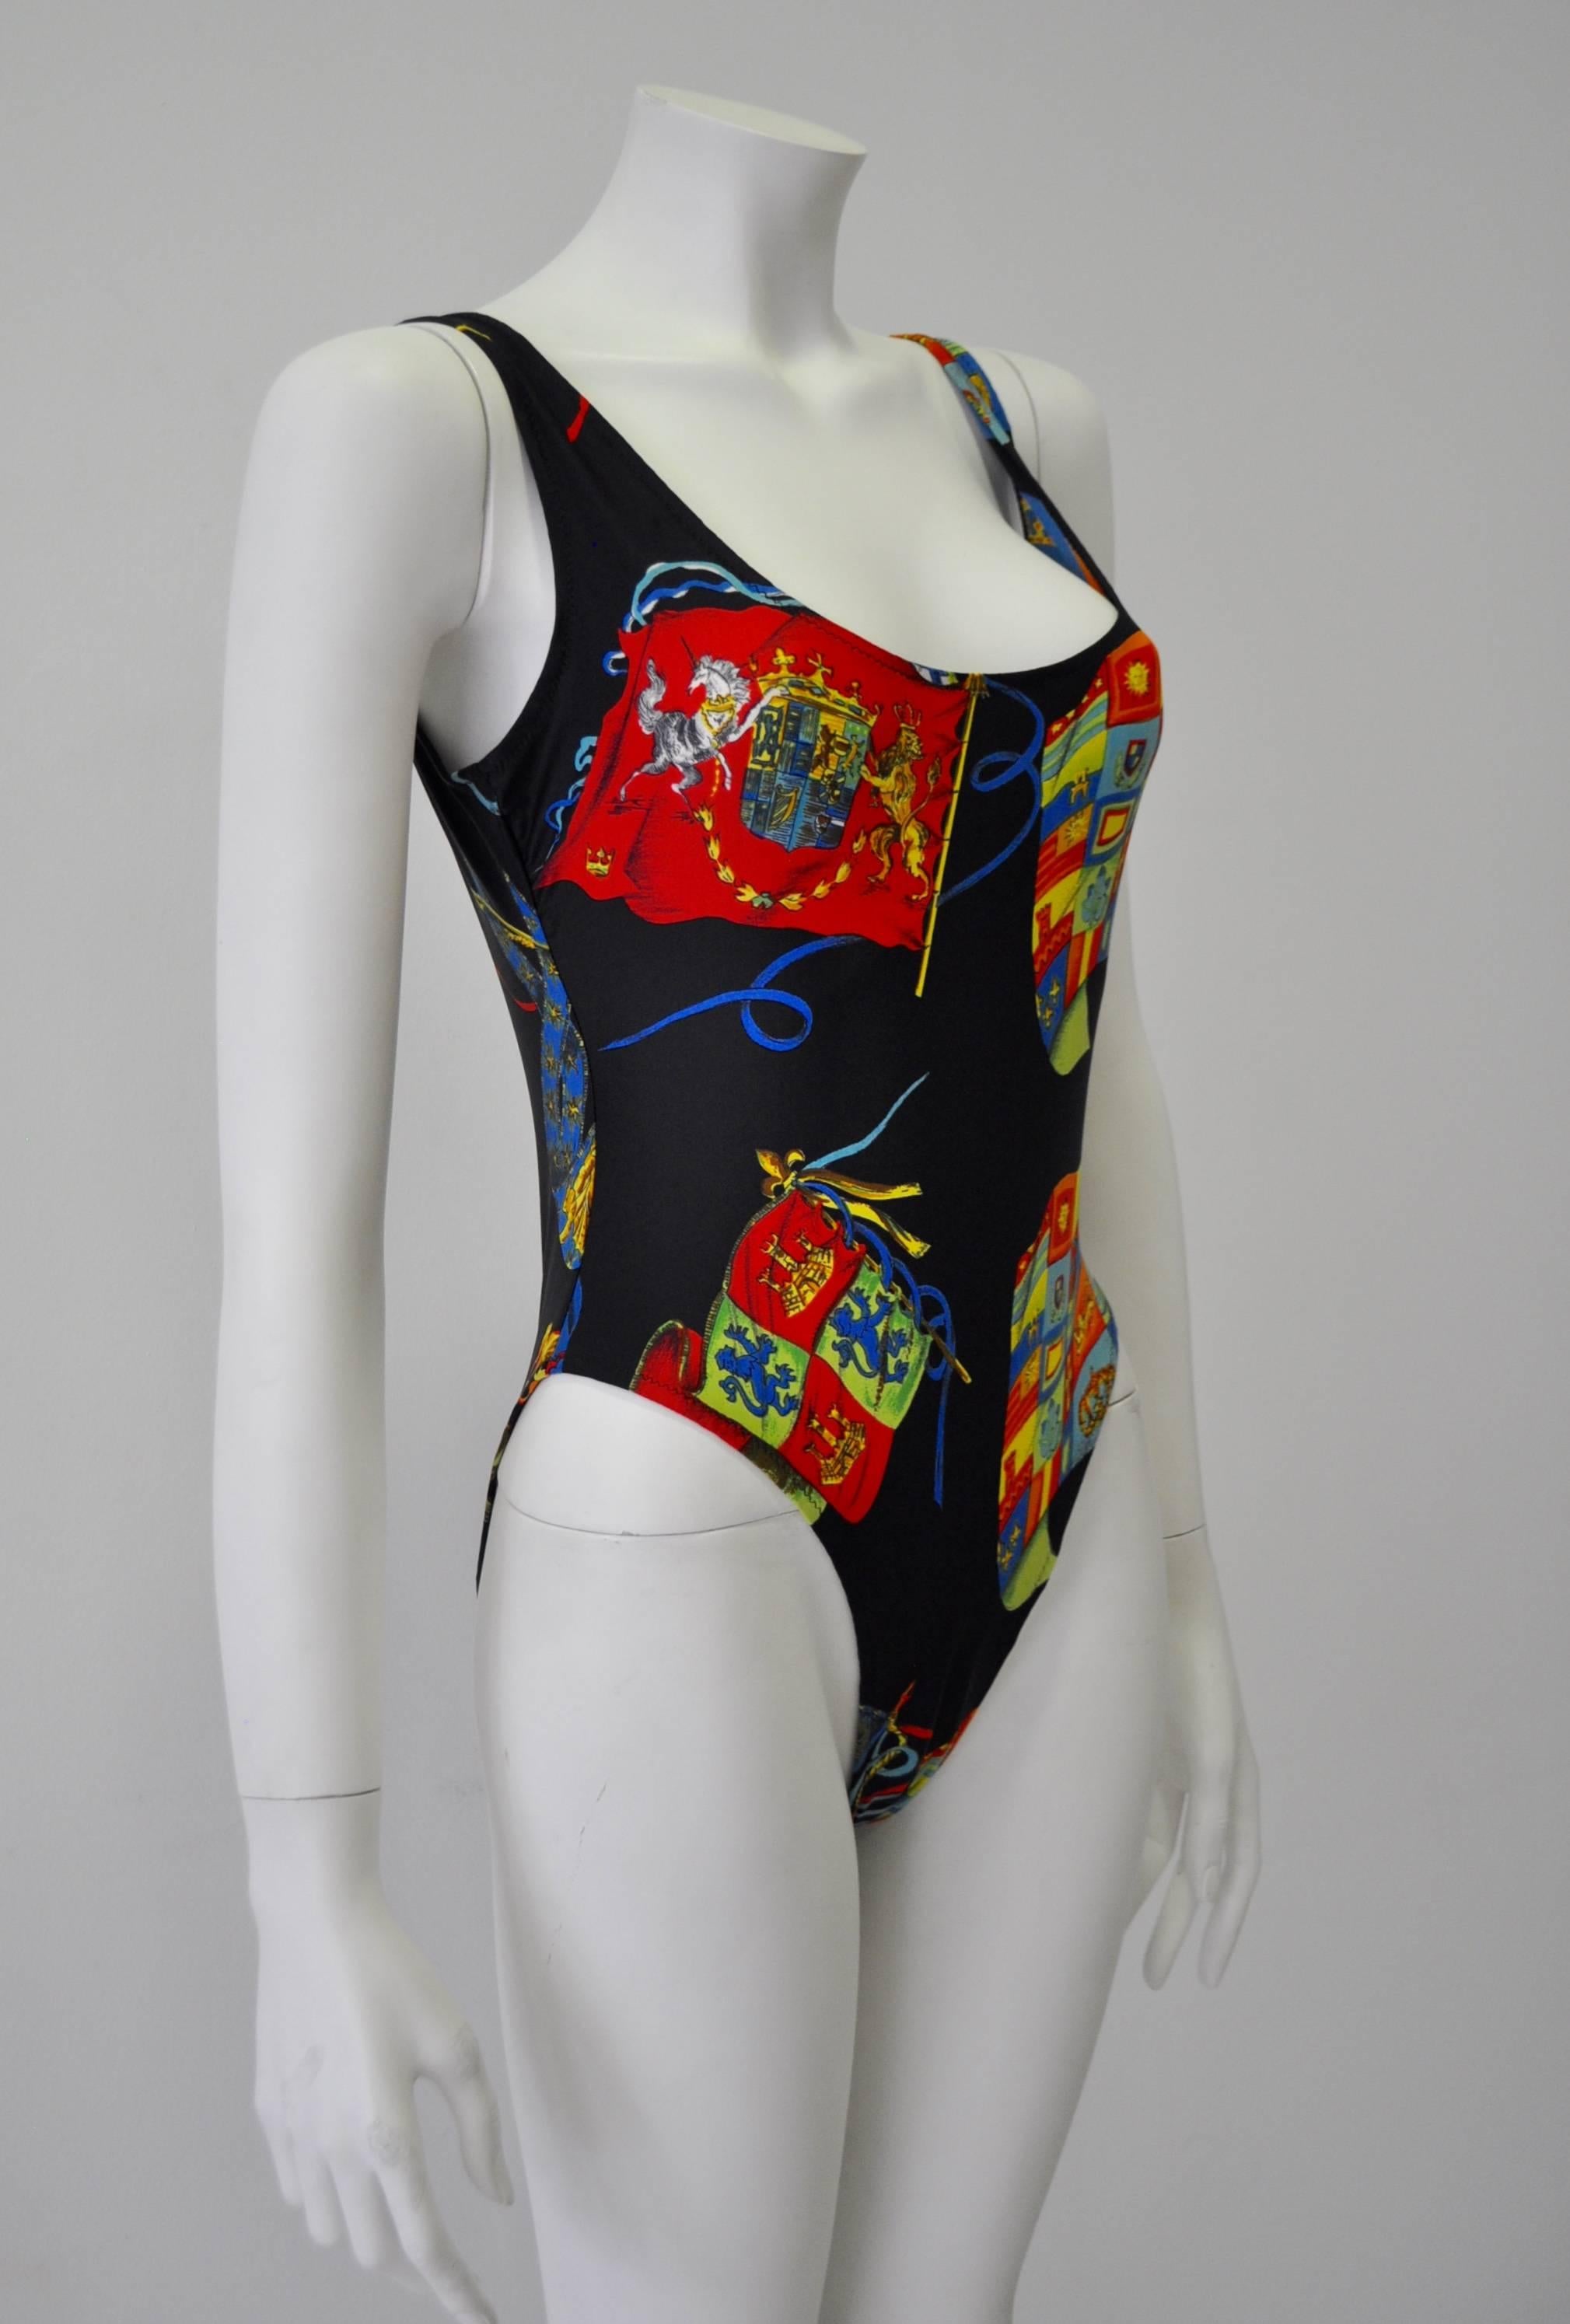 Gianni Versace Istante Coat of Arms Swimsuit In Excellent Condition For Sale In Athens, Agia Paraskevi